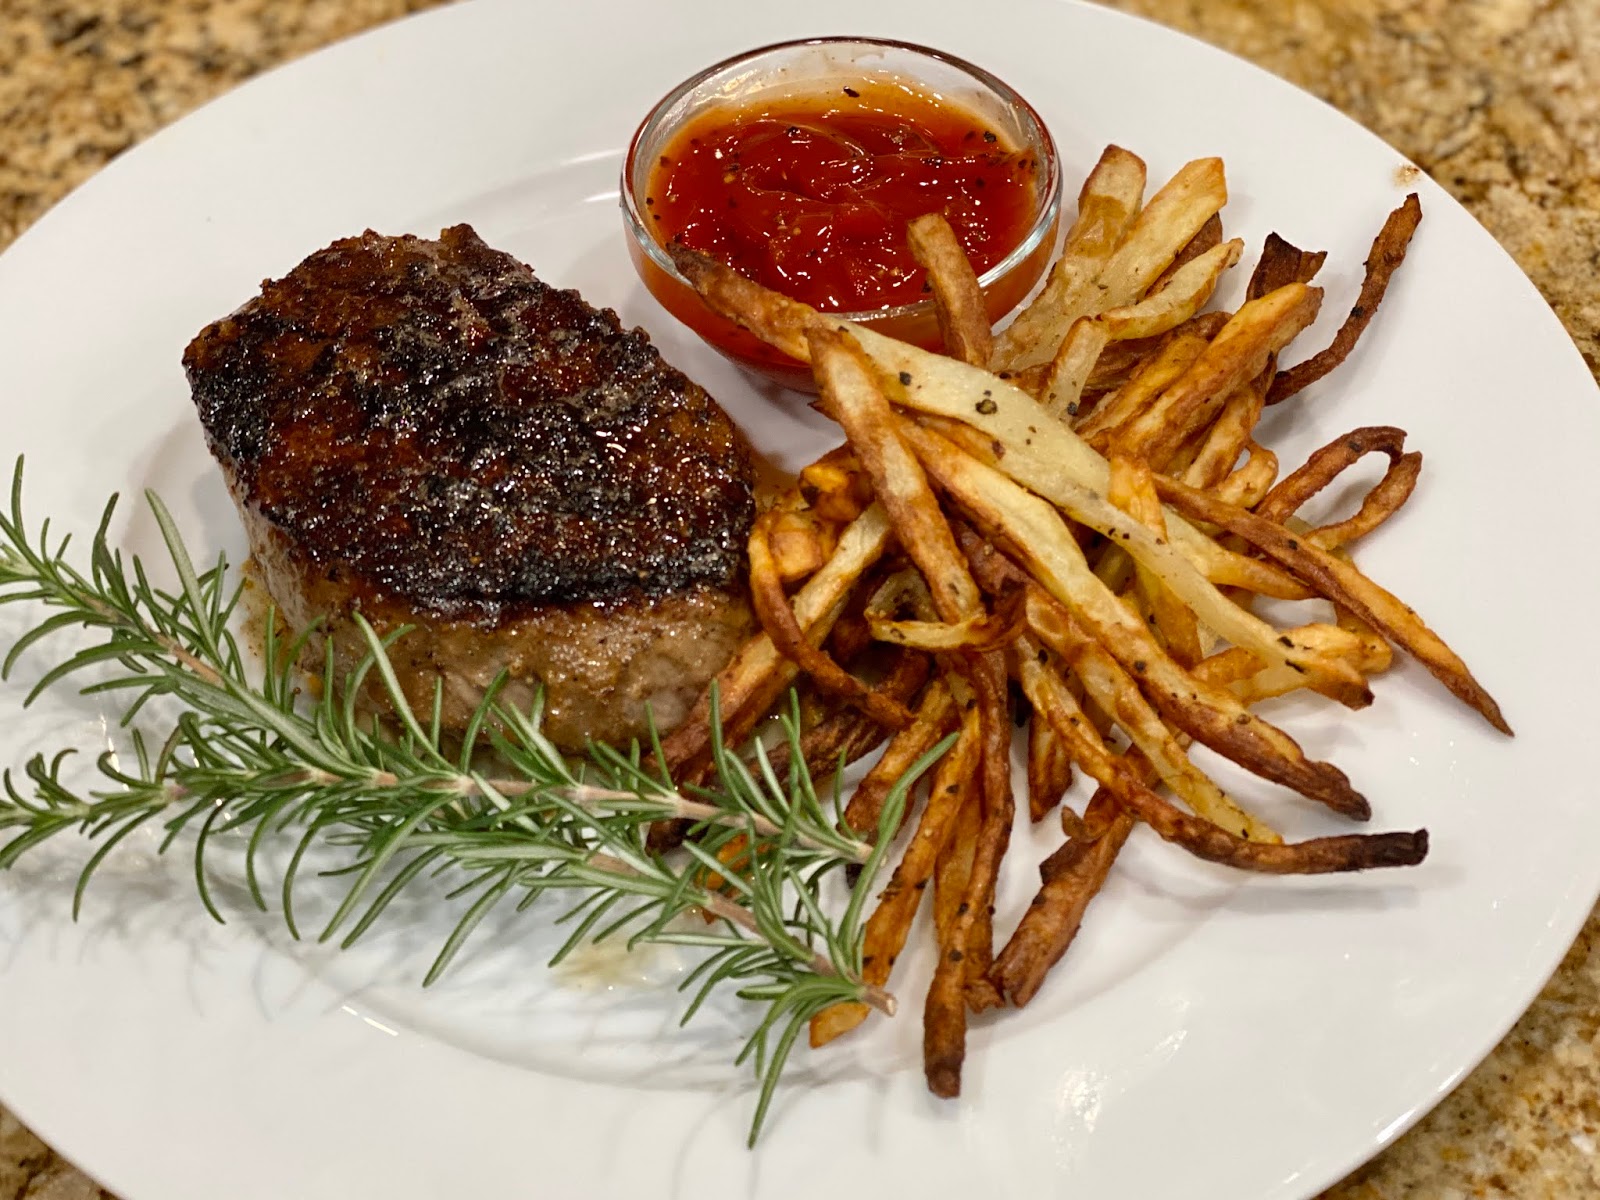 GREAT EATS HAWAII: STEAK AND POMME FRITES